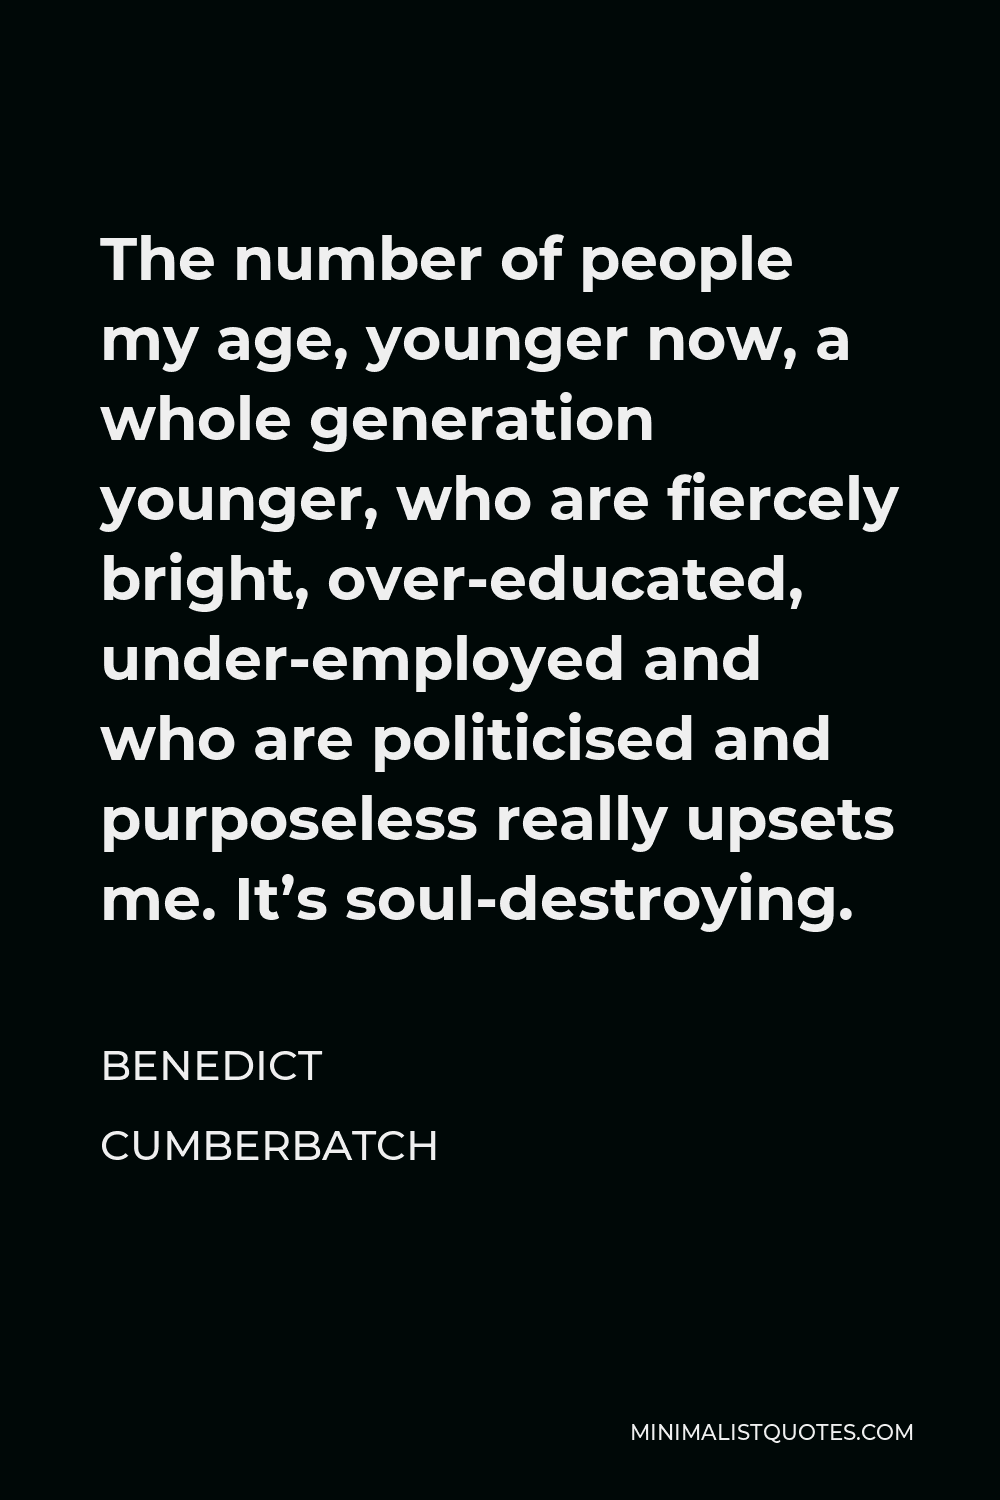 Benedict Cumberbatch Quote - The number of people my age, younger now, a whole generation younger, who are fiercely bright, over-educated, under-employed and who are politicised and purposeless really upsets me. It’s soul-destroying.